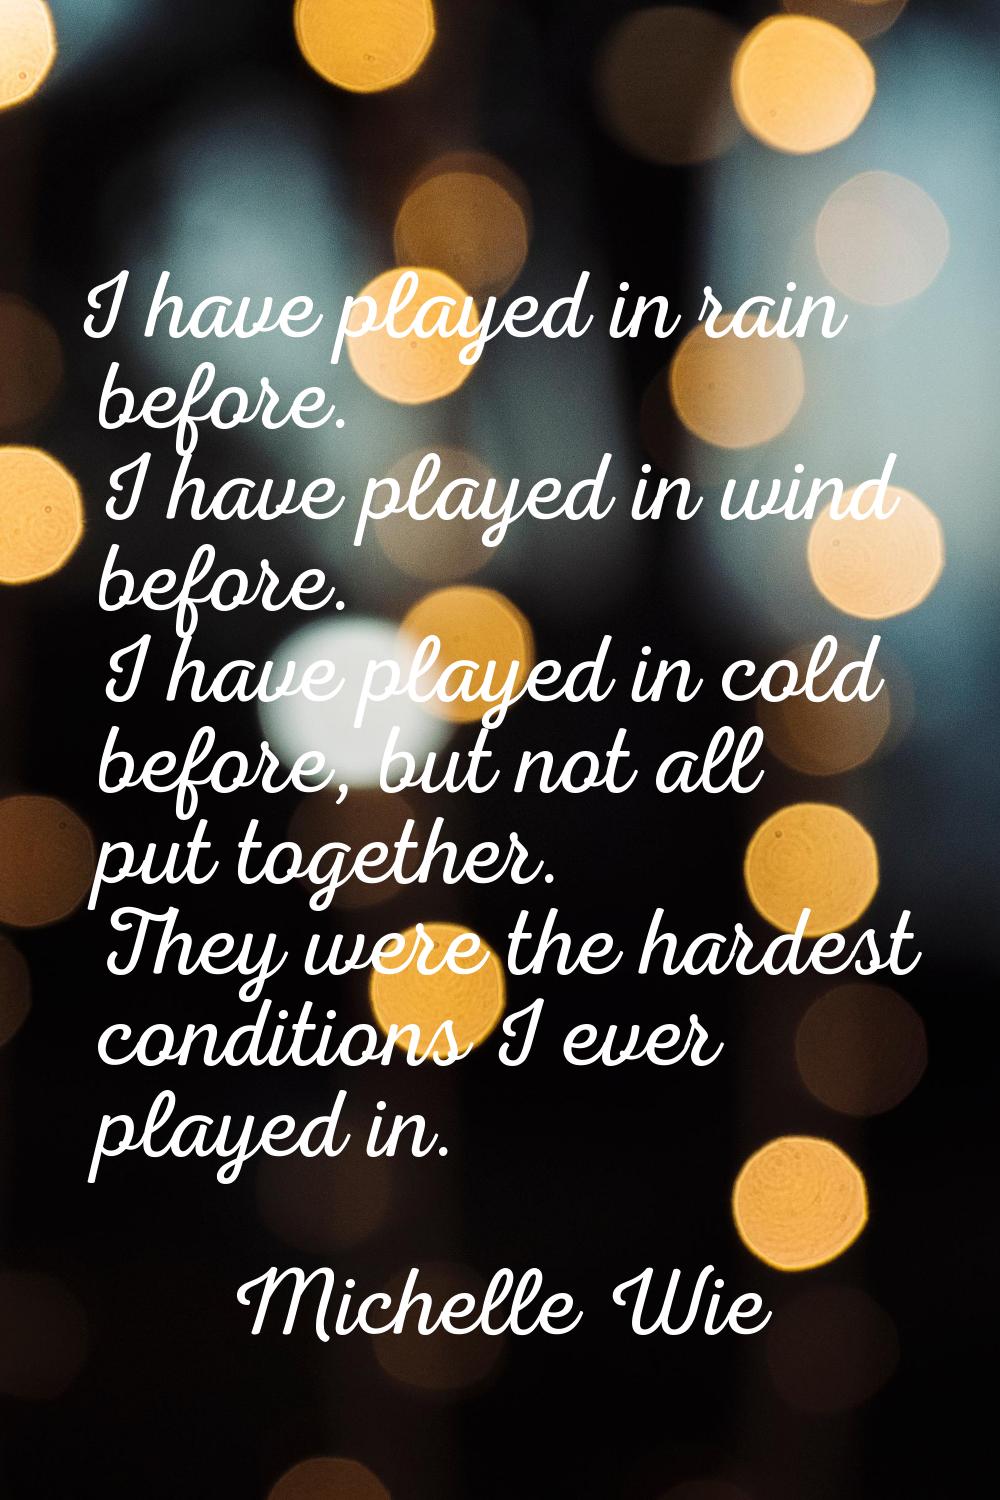 I have played in rain before. I have played in wind before. I have played in cold before, but not a